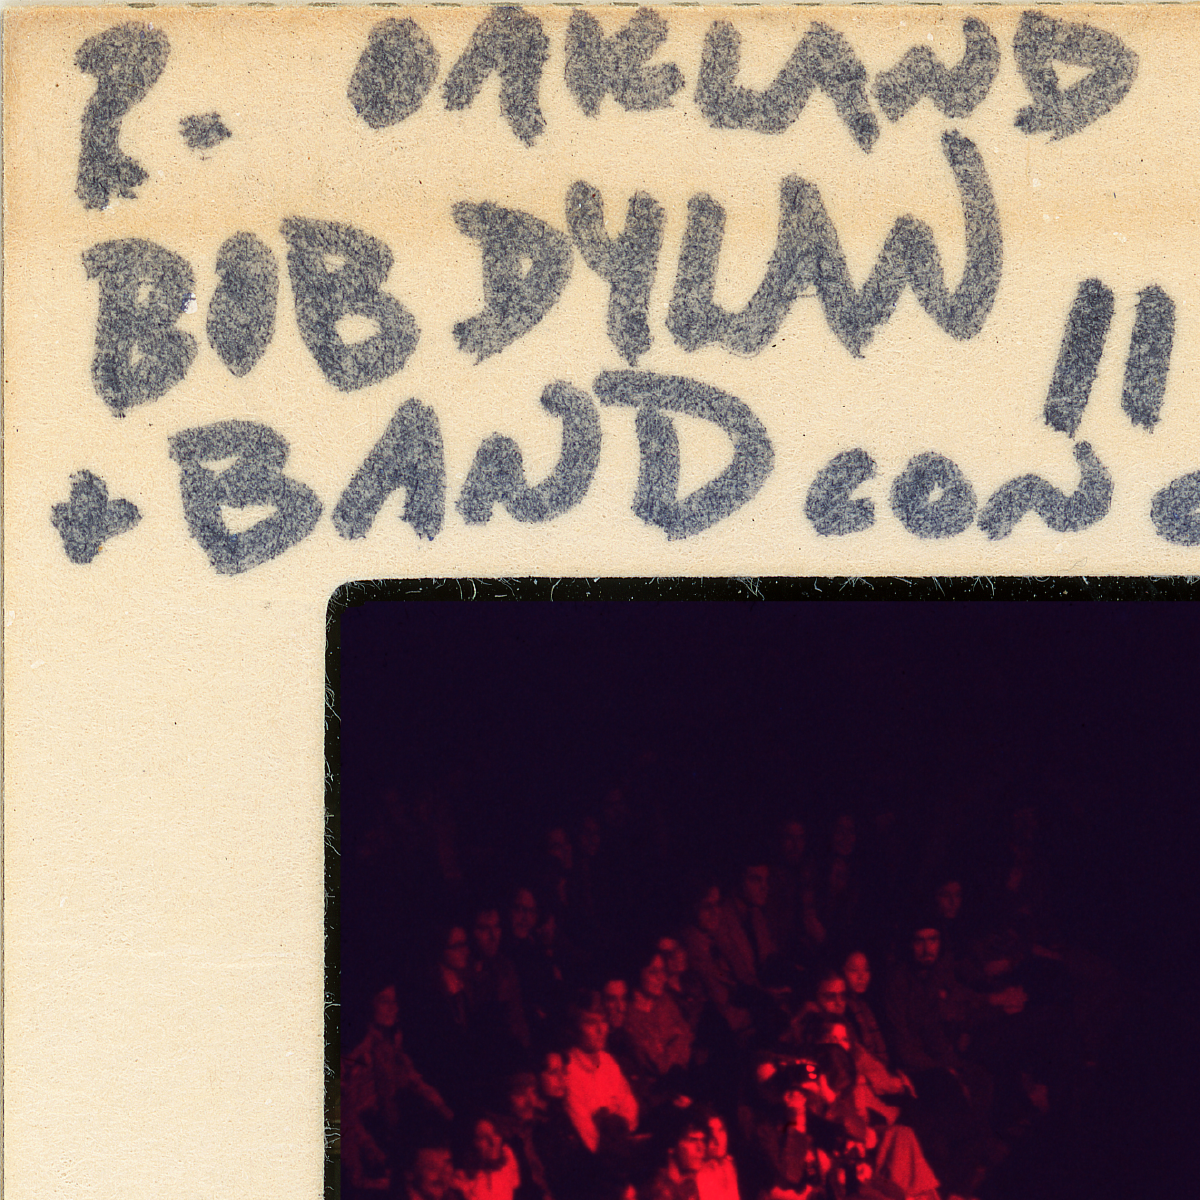 bob dylan and the band, live at the oakland coliseum, february 11, 1974 - 6 x 6 inch - limited edition prints